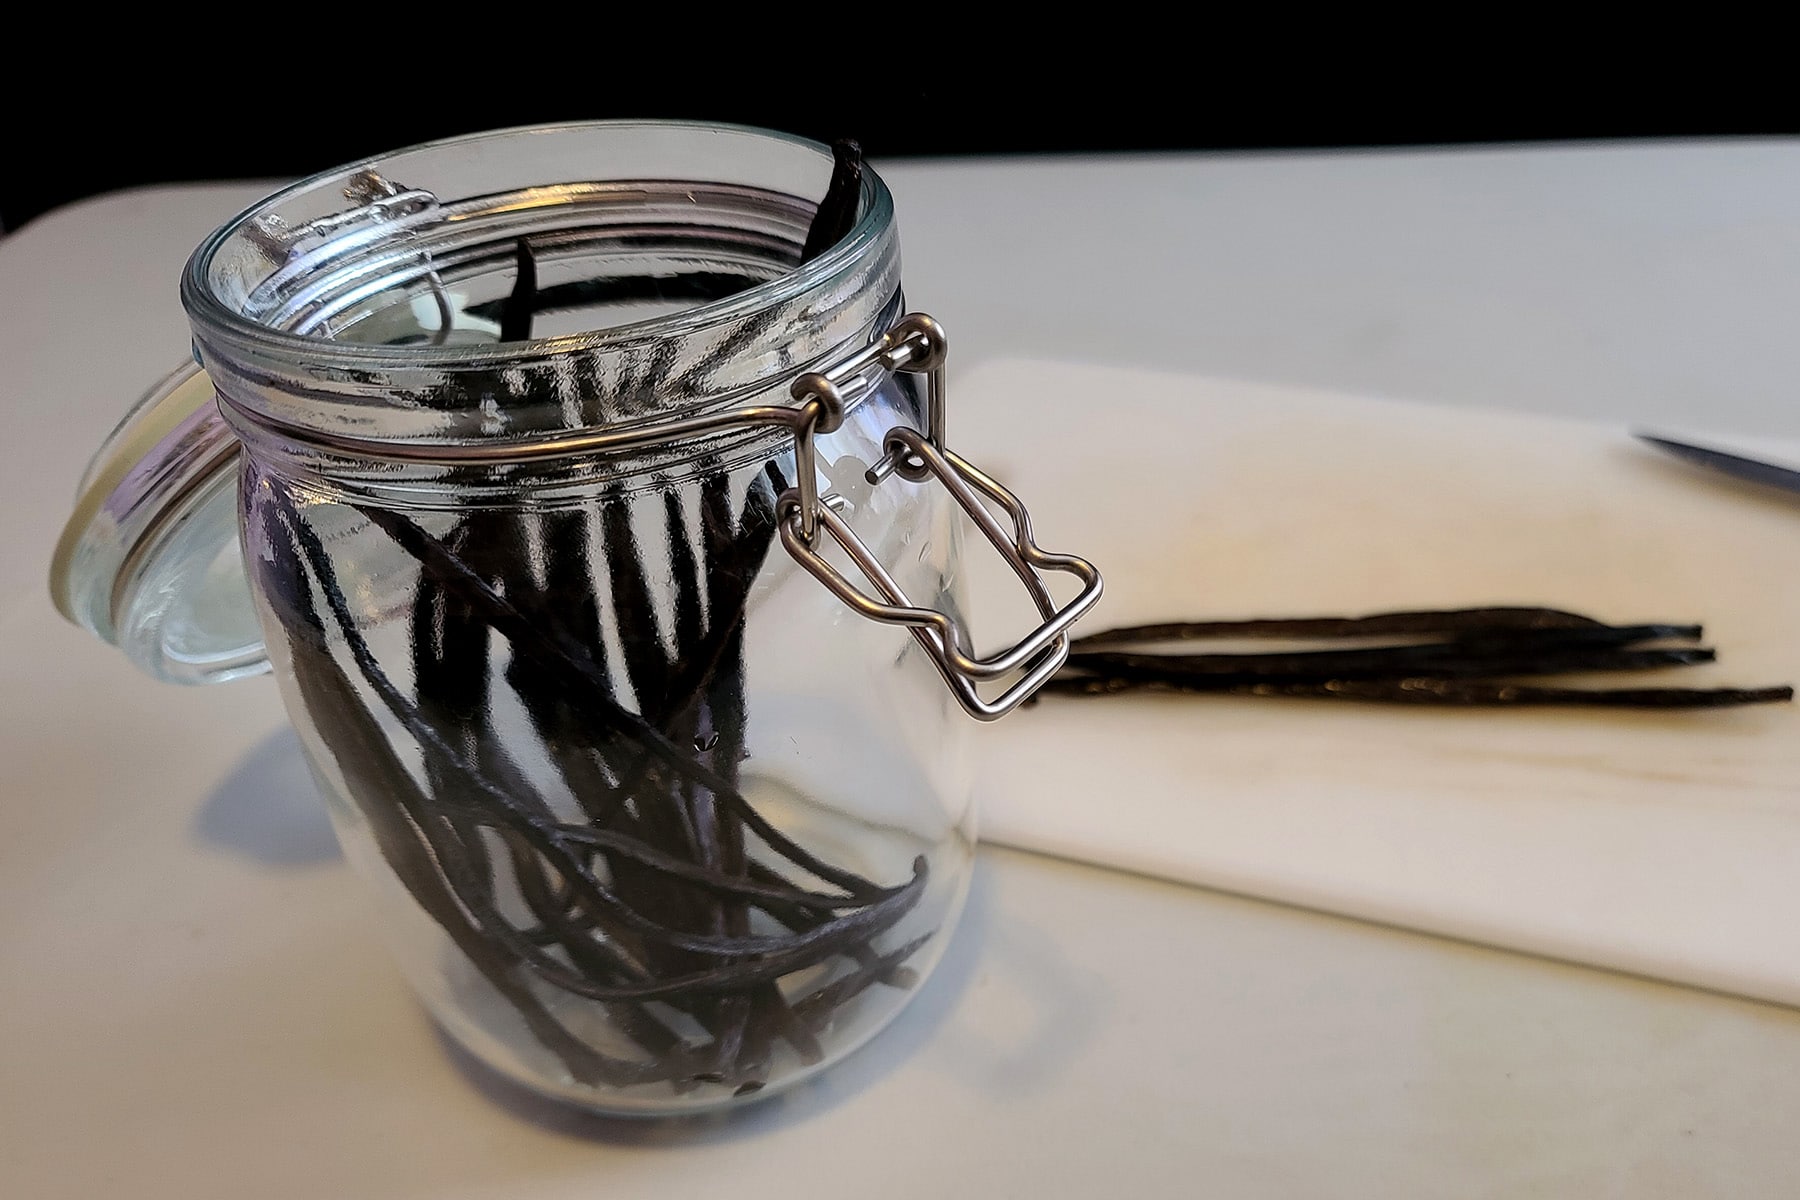 A glass jar with several split vanilla beans in it.